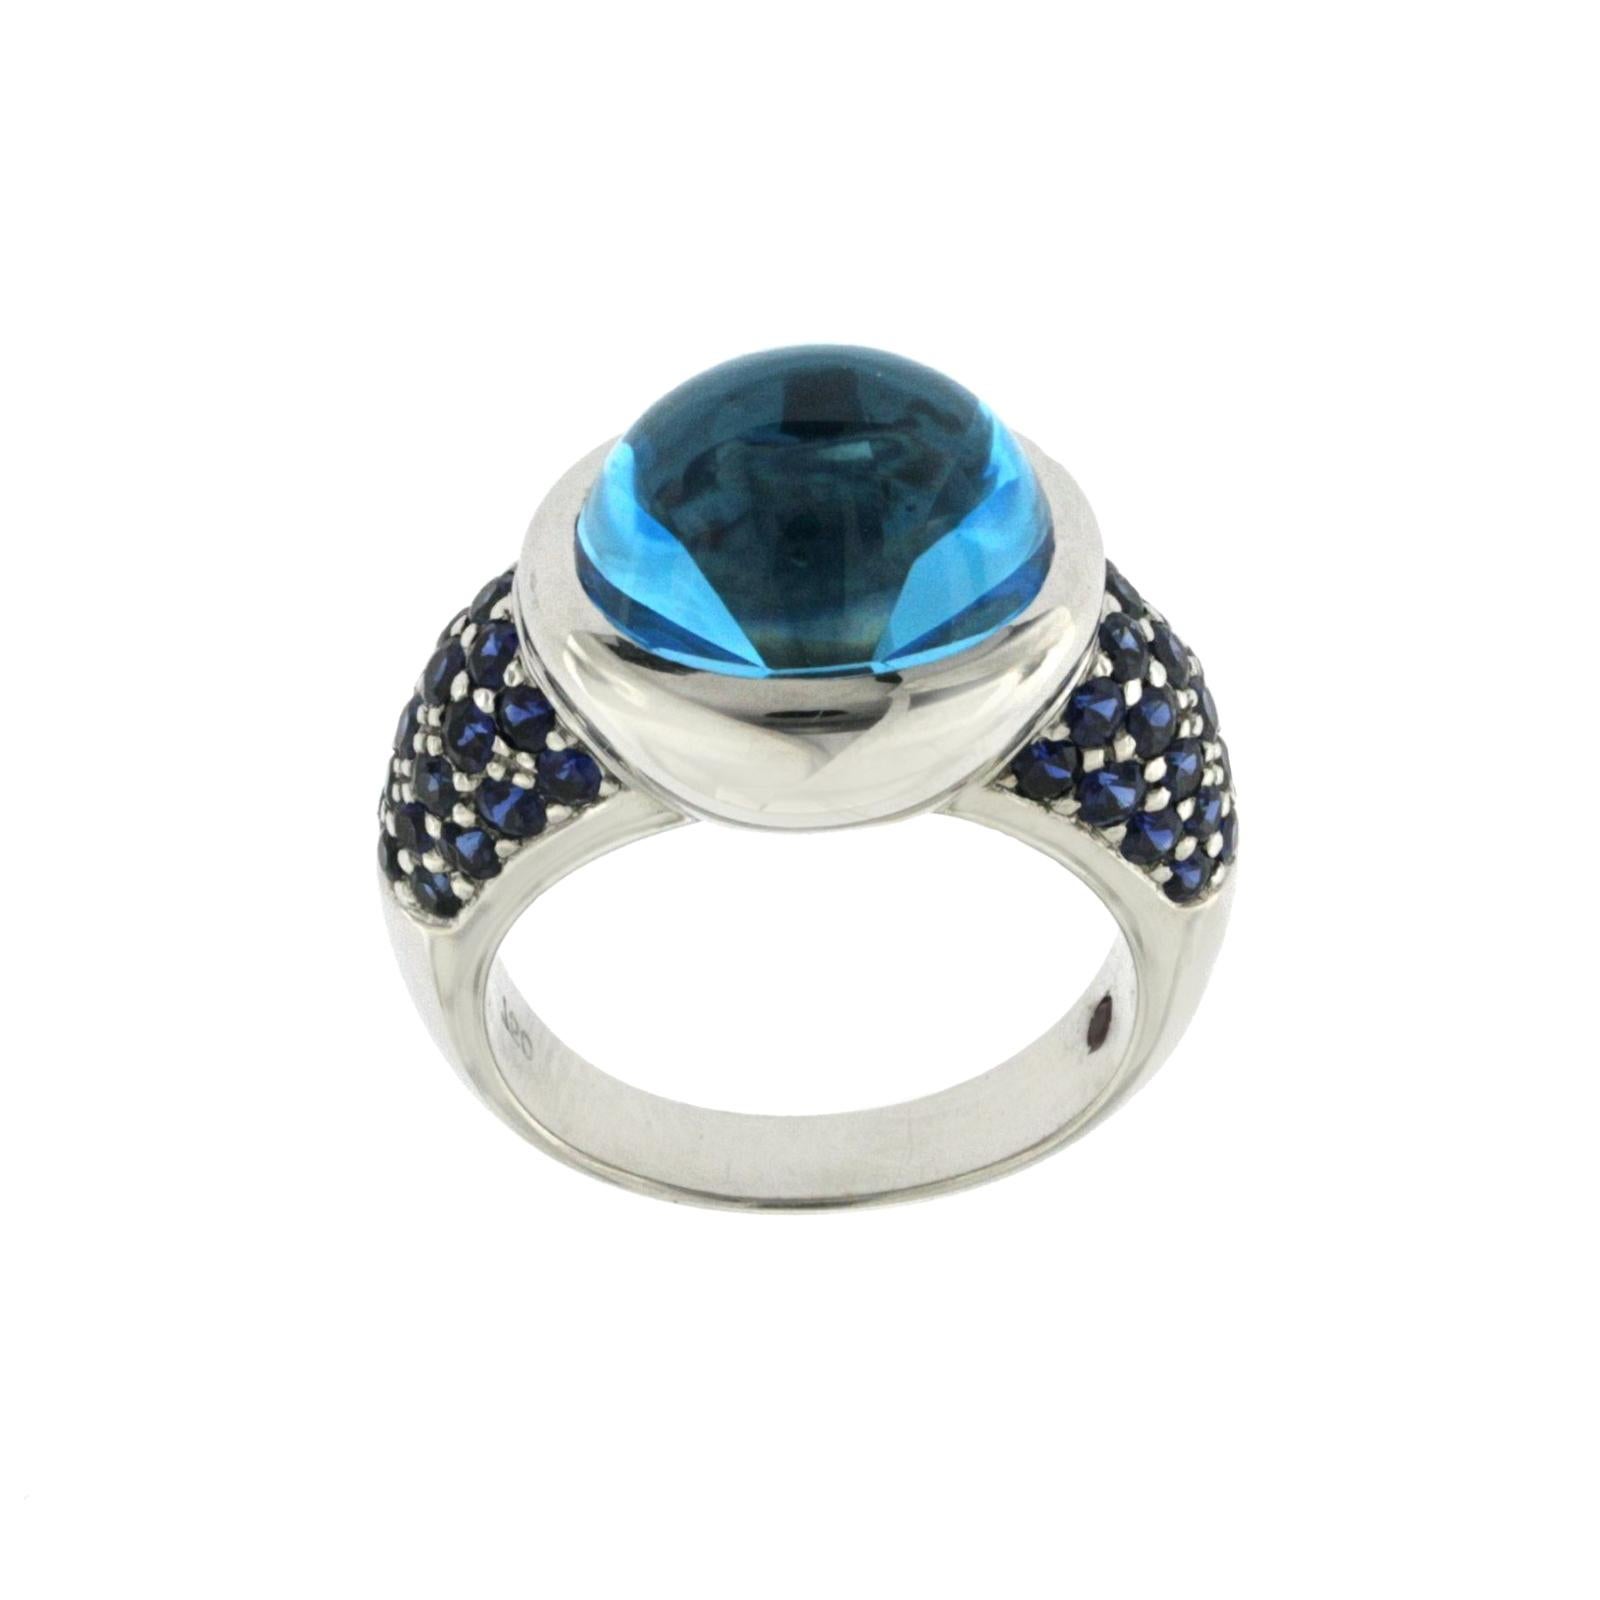 100% Authentic, 100% Customer Satisfaction

Band Width: 13.3 mm

Metal: 18K White Gold

Size: 7

Hallmarks: 750

Total Weight: 13.2  Grams

Stone Type: Ruby, Blue Sapphire, Blue Topaz

Condition: Pre Owned 

Estimated Retail Price: $4500

Stock